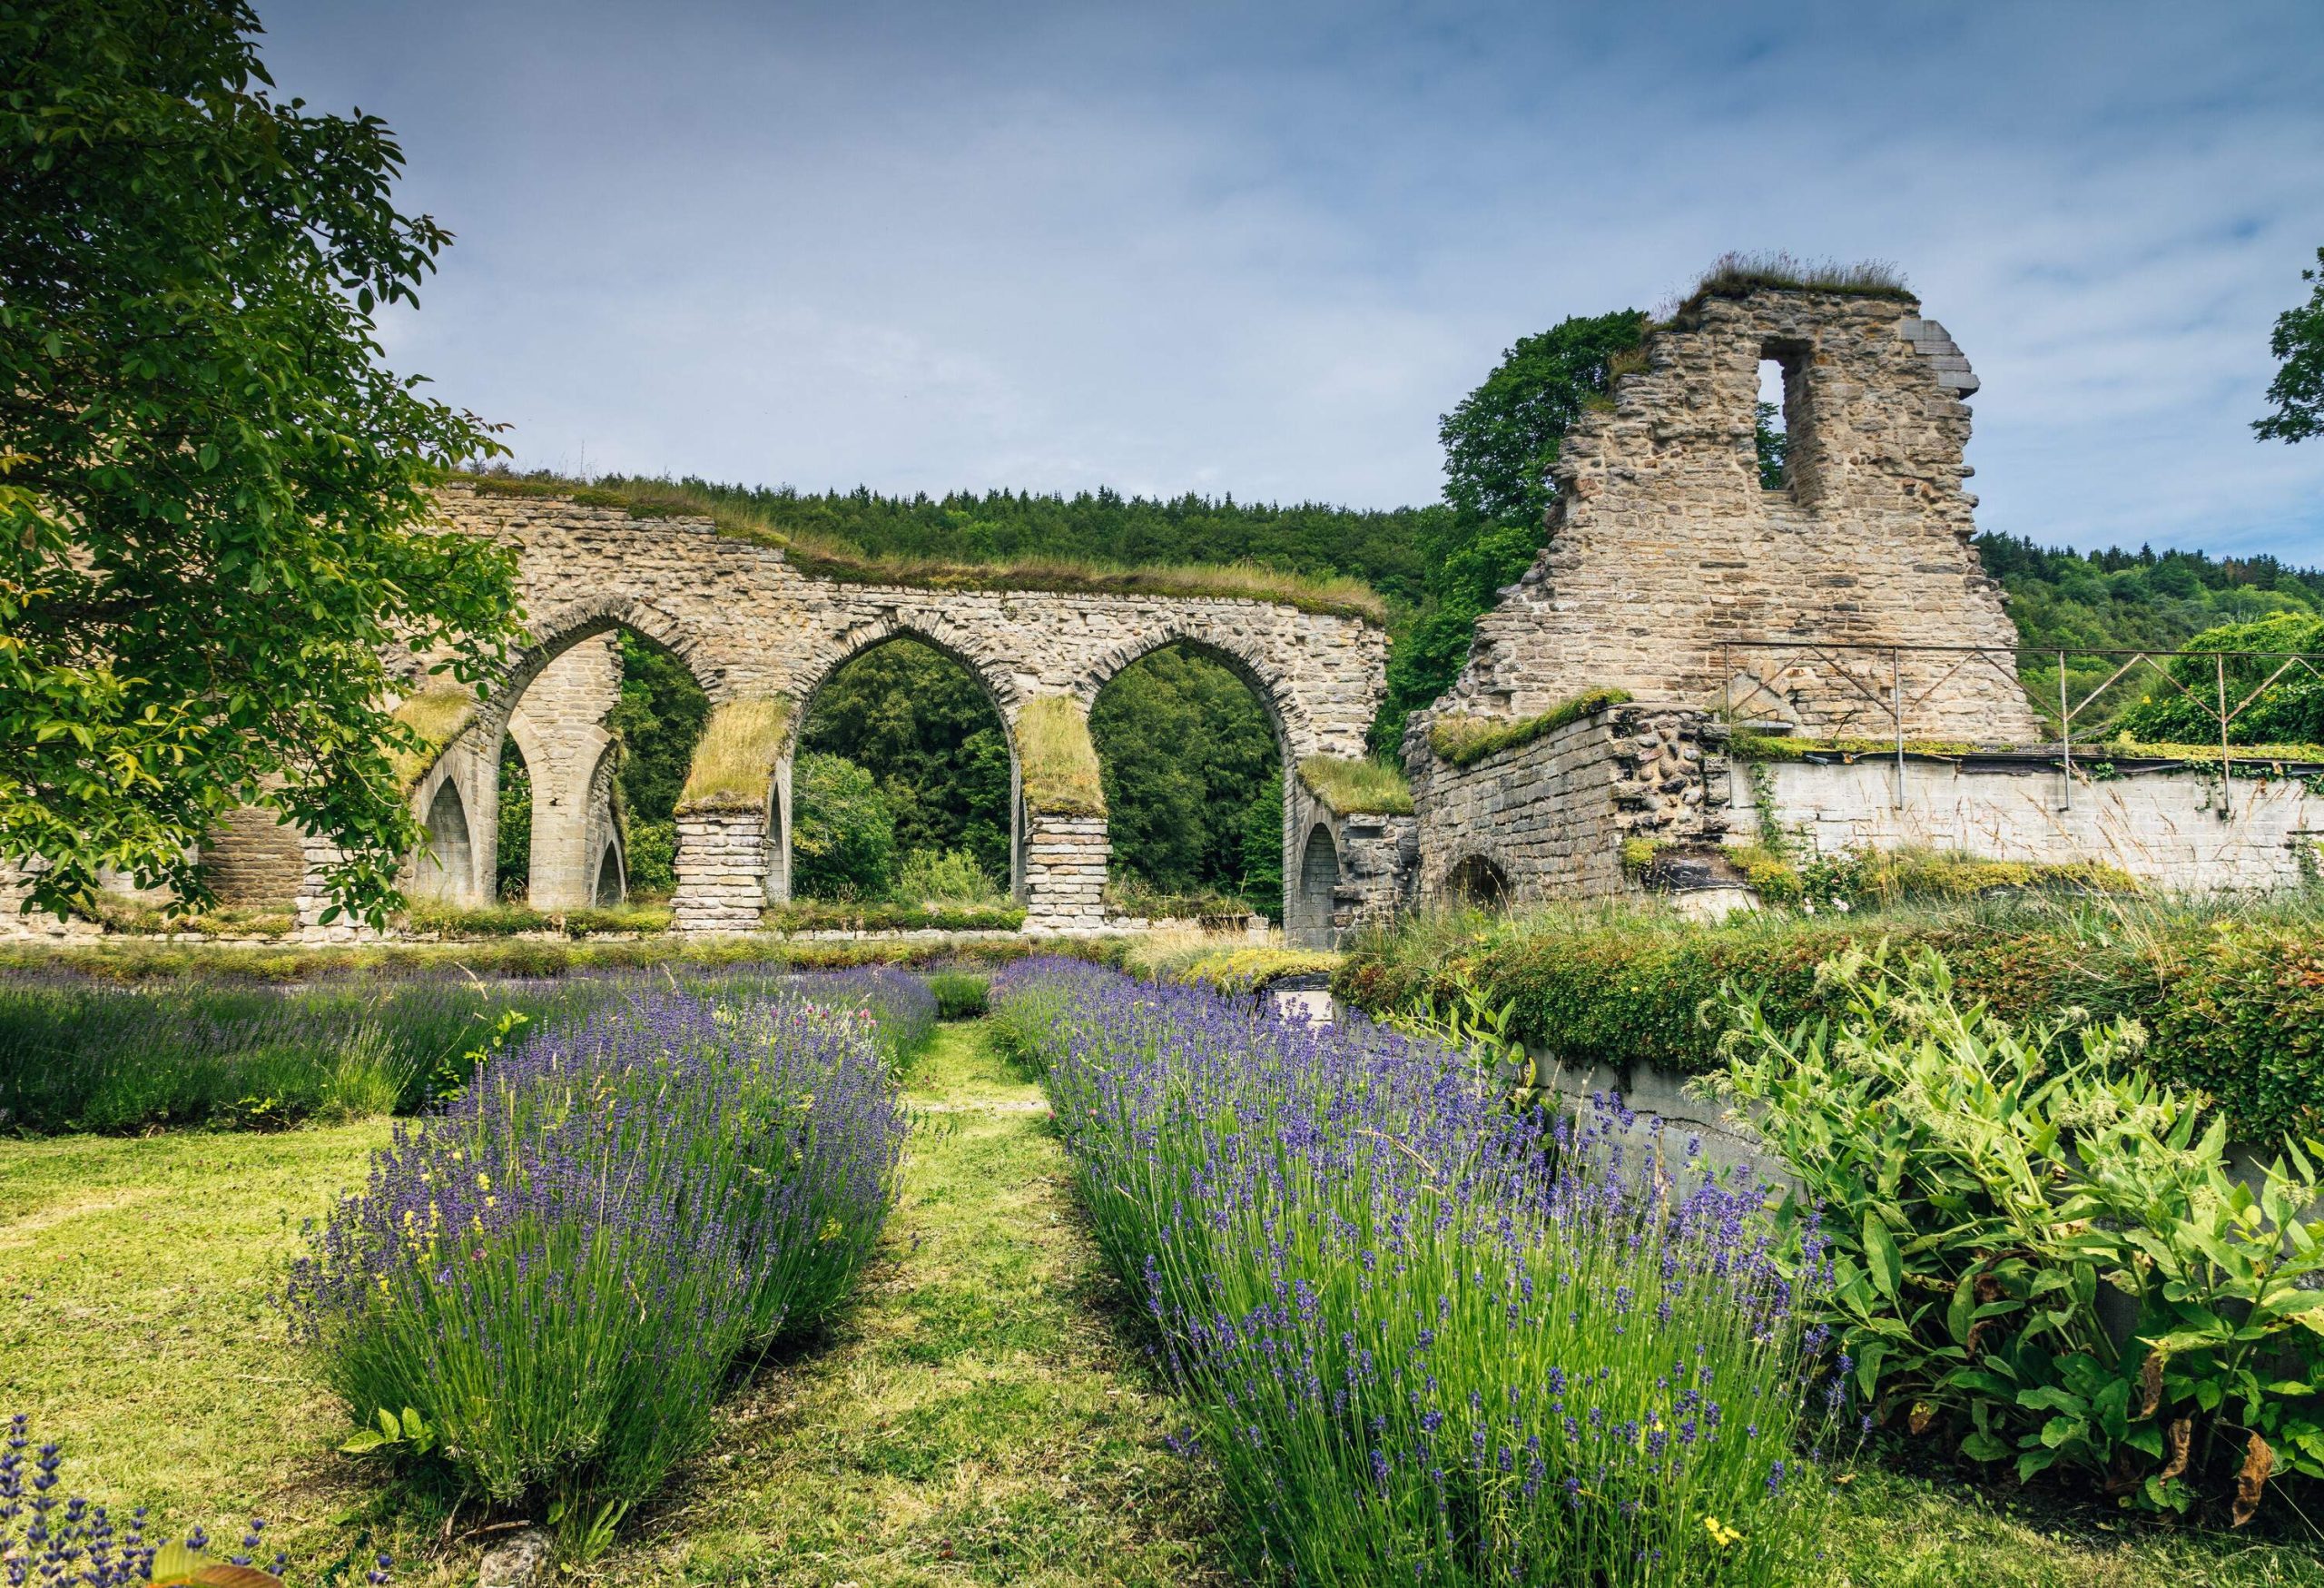 Ruin of a 900 year old monastery or cloister located in Alvastra in Sweden. Rows of lavender growing in the foreground